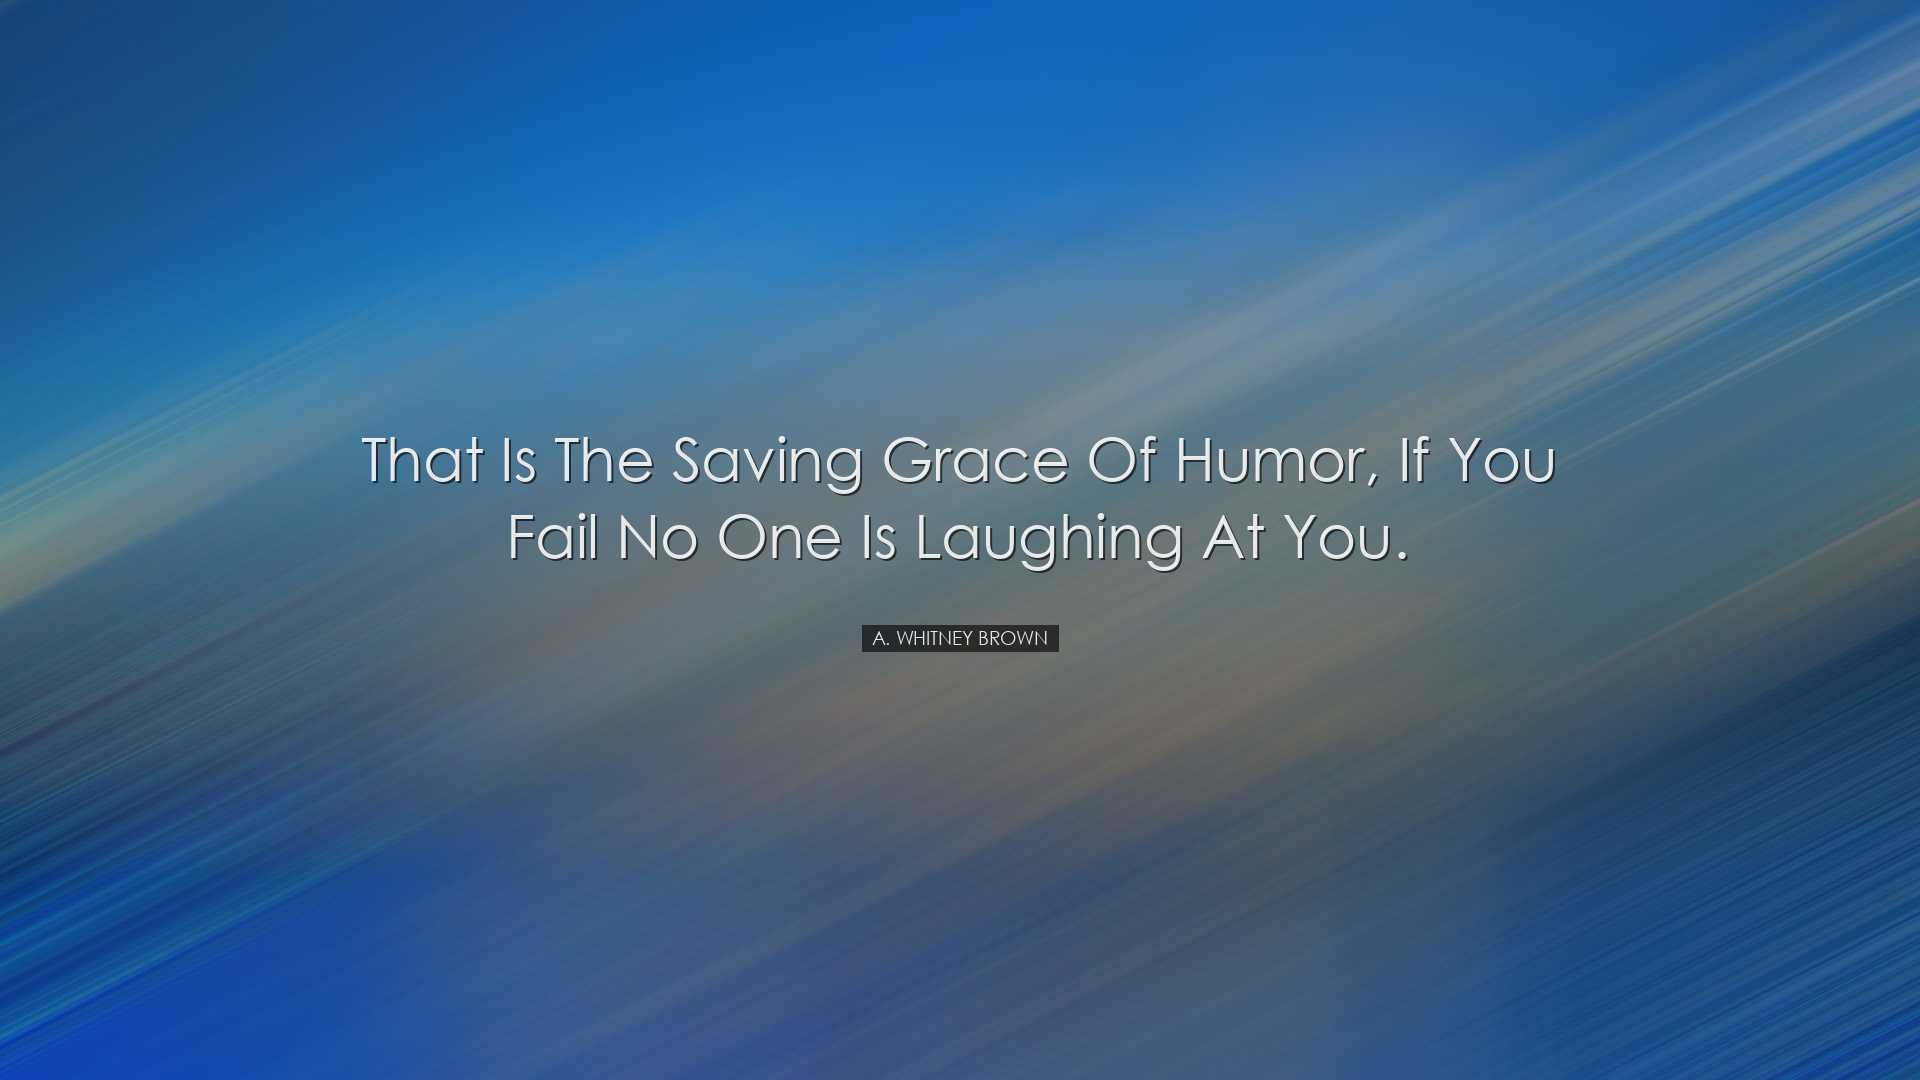 That is the saving grace of humor, if you fail no one is laughing